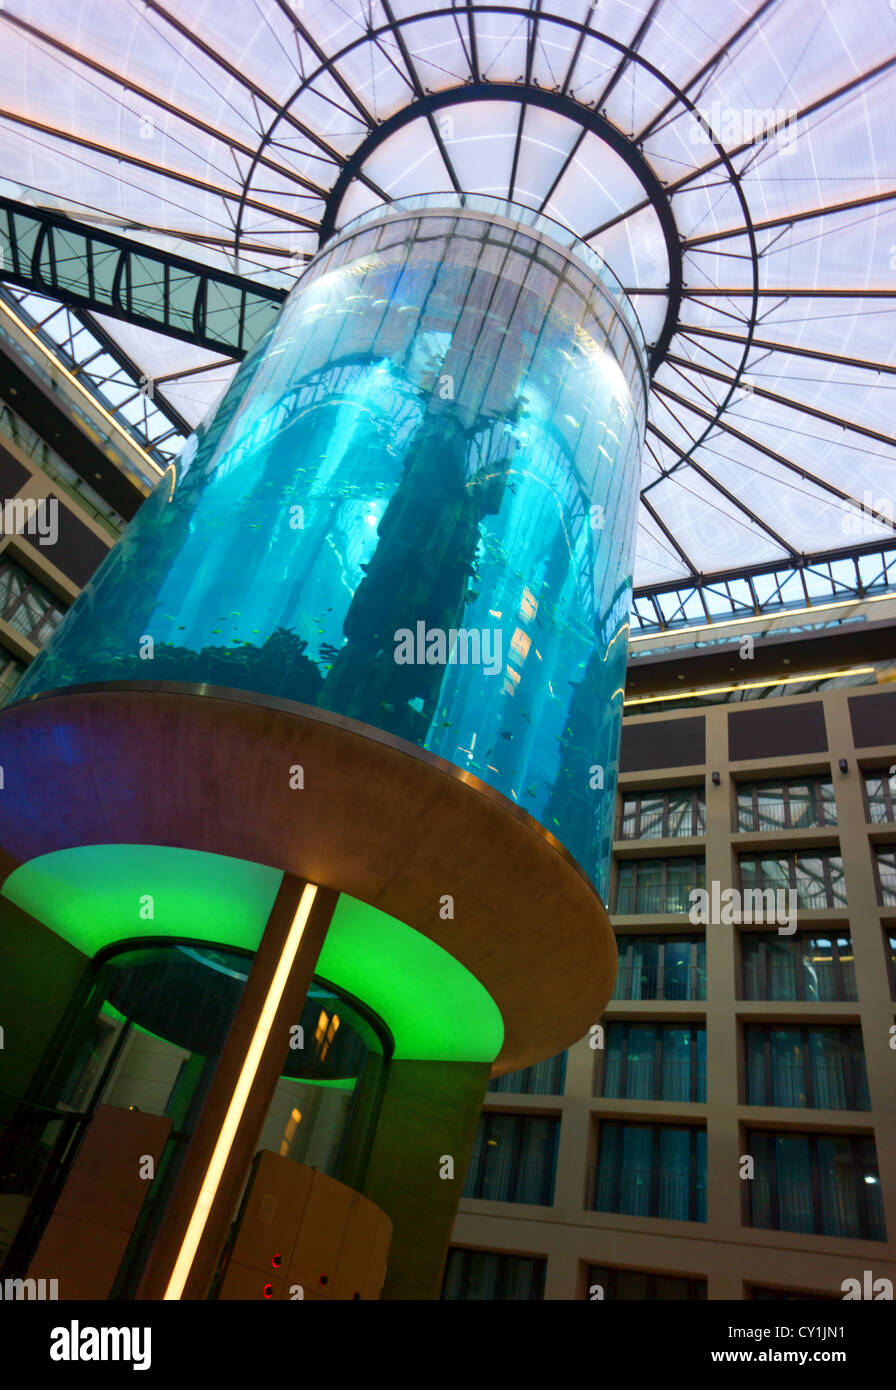 World’s Largest Cylindrical Aquarium, at the Radisson SAS hotel in Berlin Mitte, Germany. Stock Photo